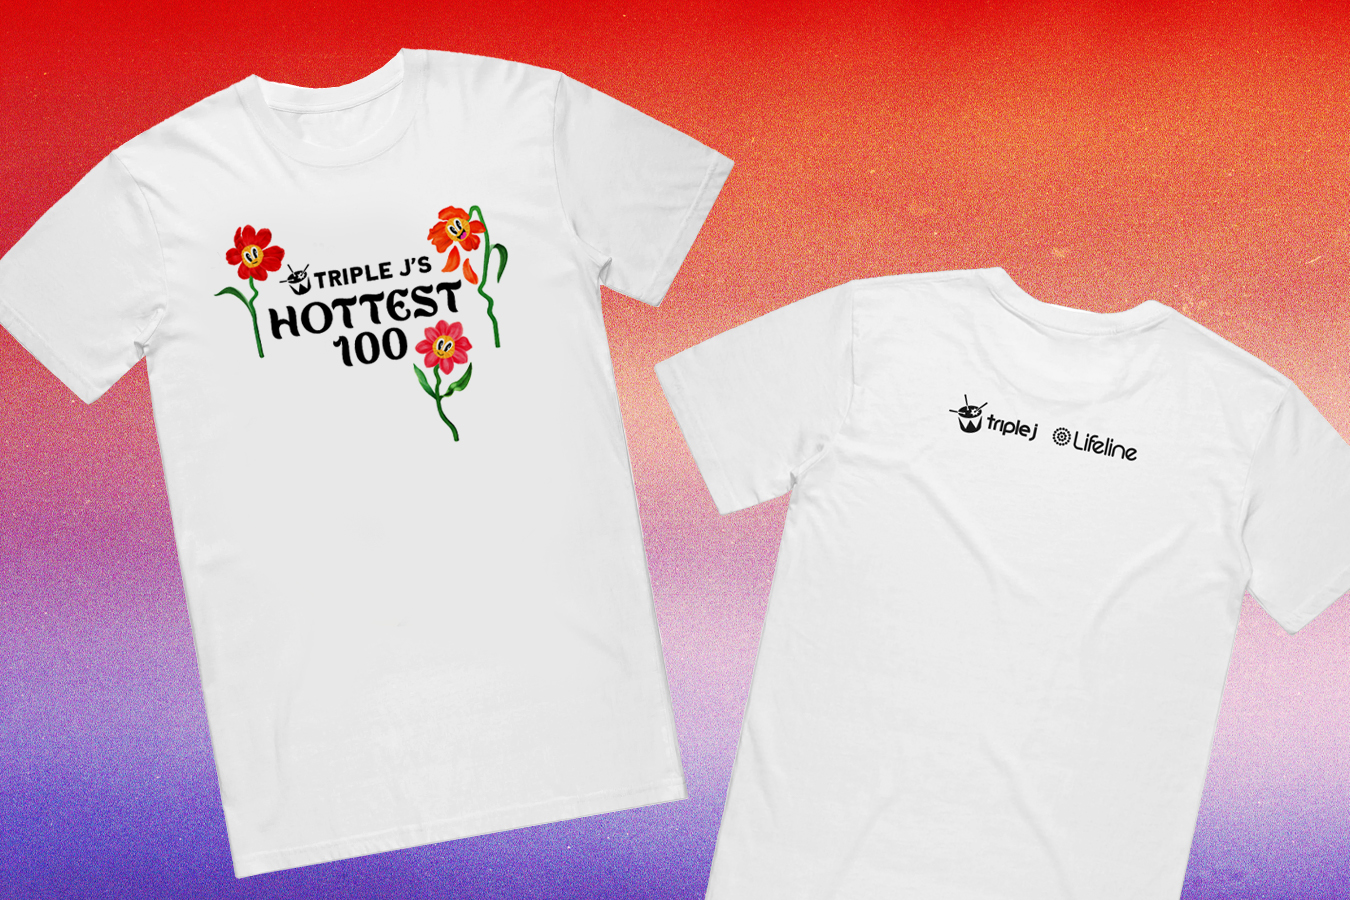 Design for Hottest 100 x Lifeline t-shirt front and back with text, logos, and cartoon flowers